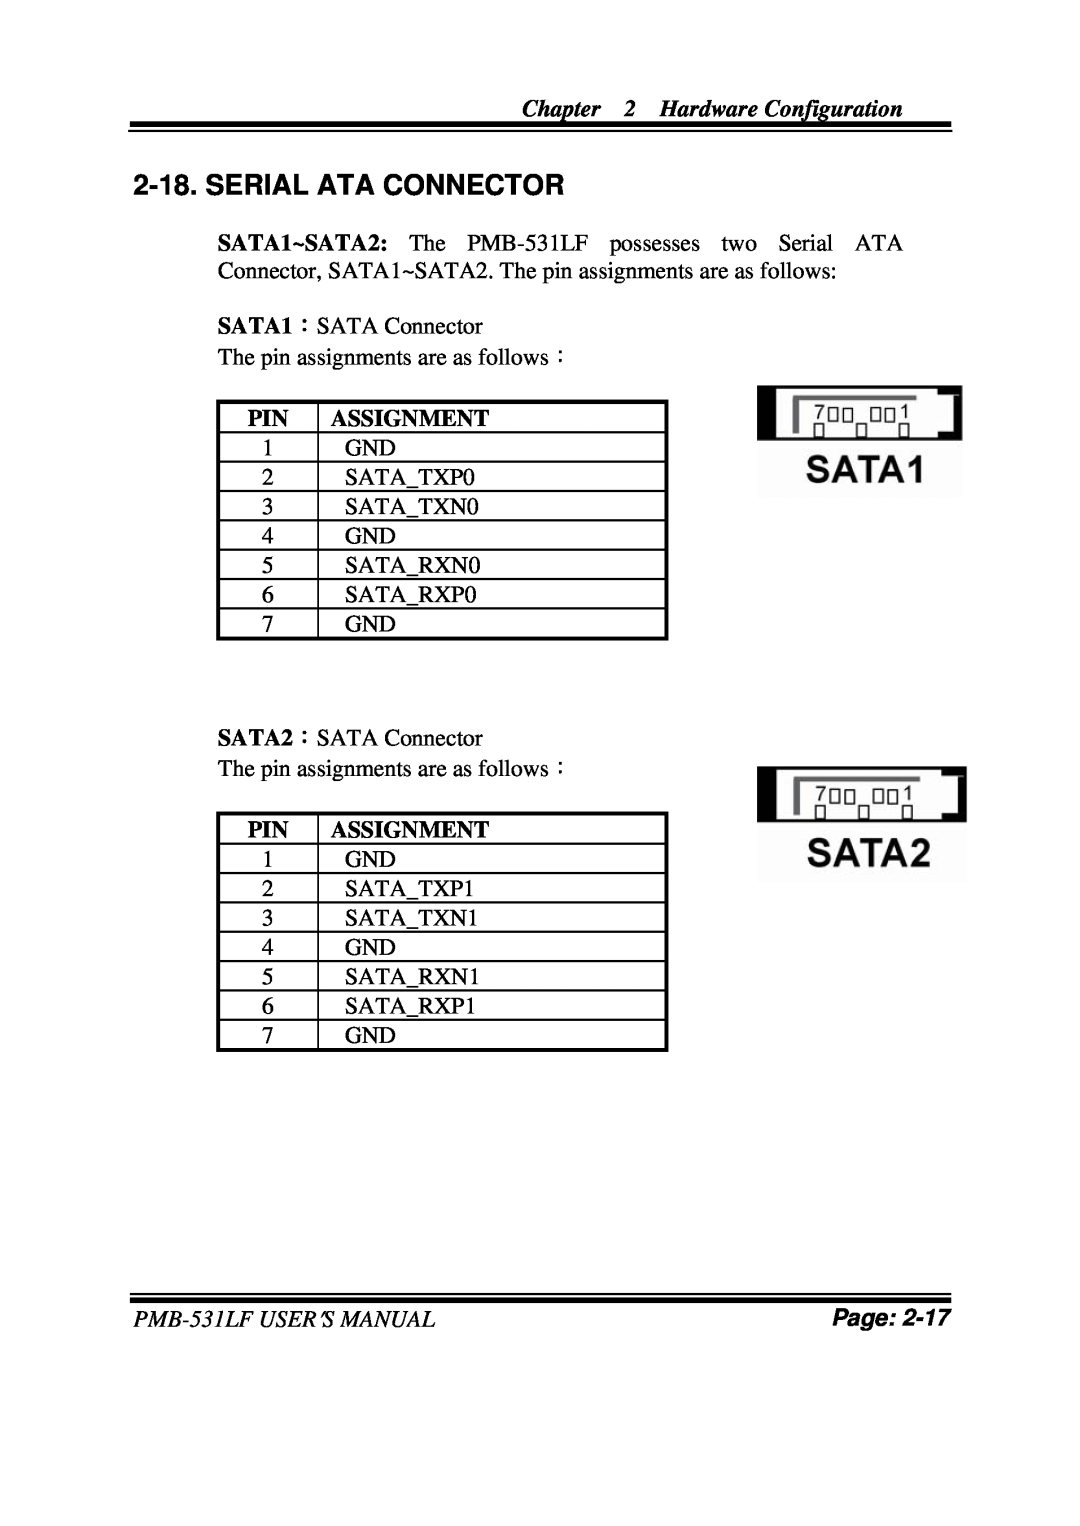 Intel user manual Serial Ata Connector, Hardware Configuration, Assignment, PMB-531LFUSER′S MANUAL, Page 